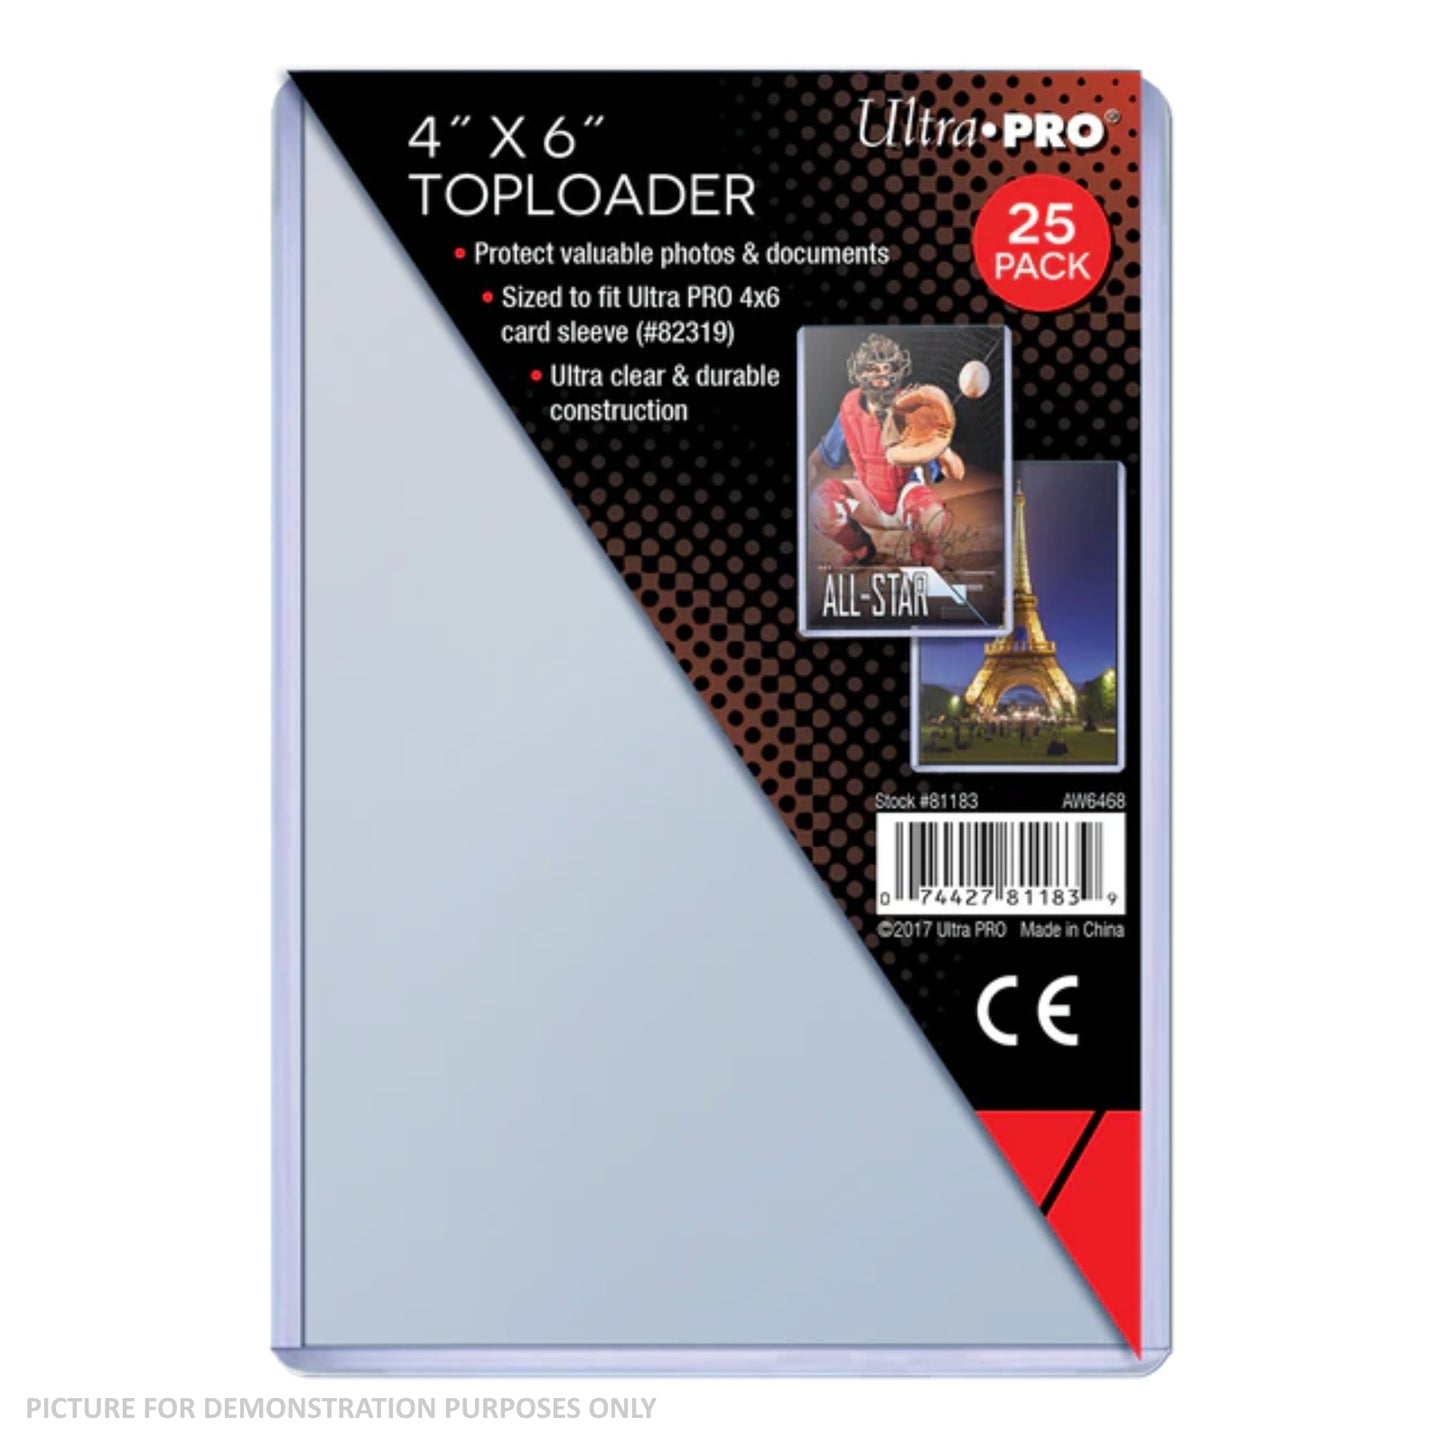 Ultra Pro PHOTO Toploaders 4" x 6" - PACK OF 25